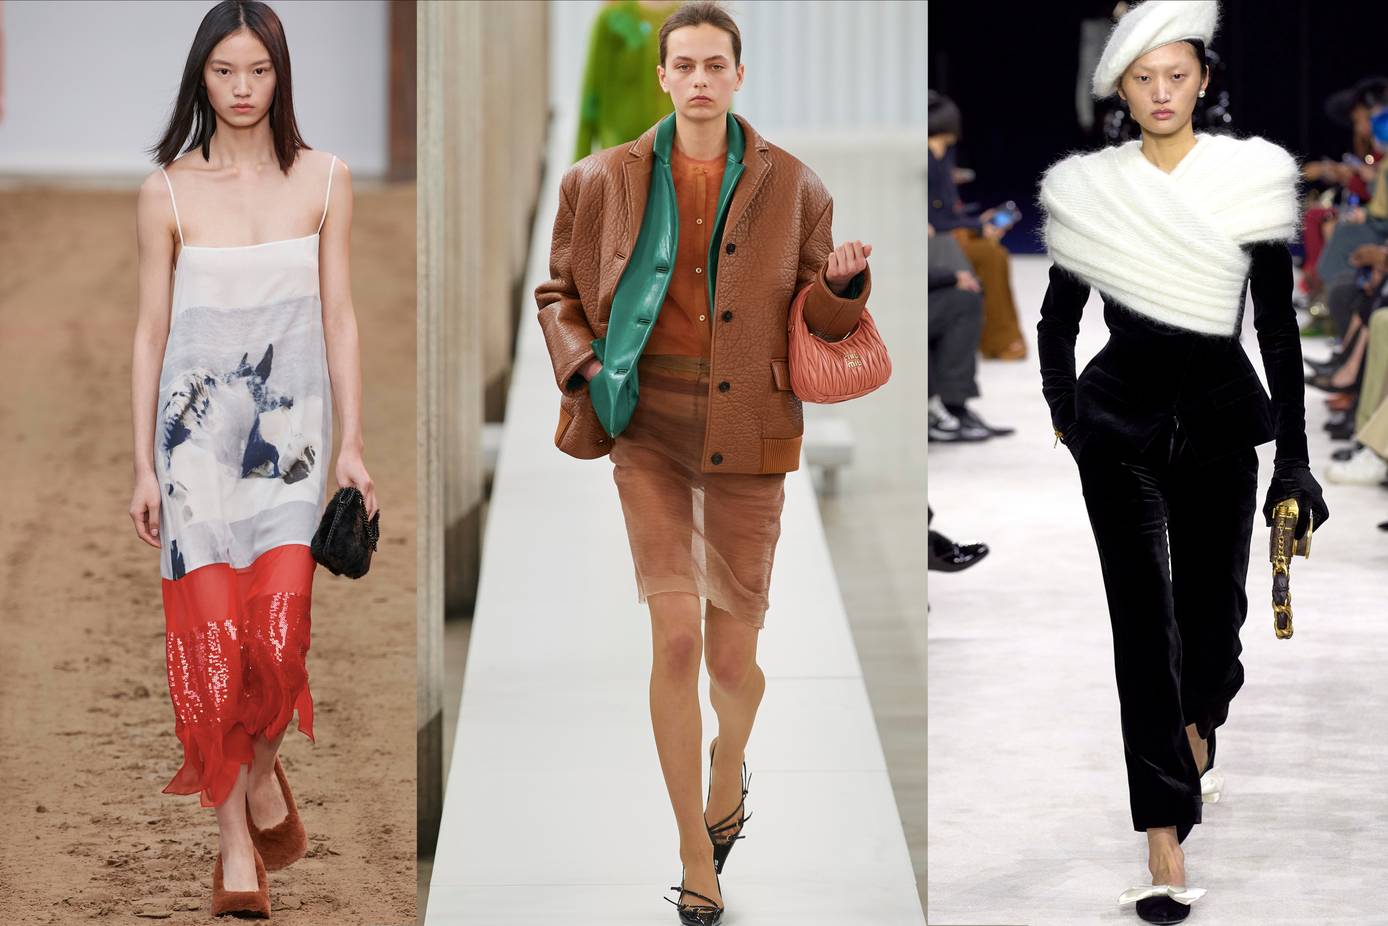 Paris Fashion Week's Top Trends Include One Unexpected Accessory